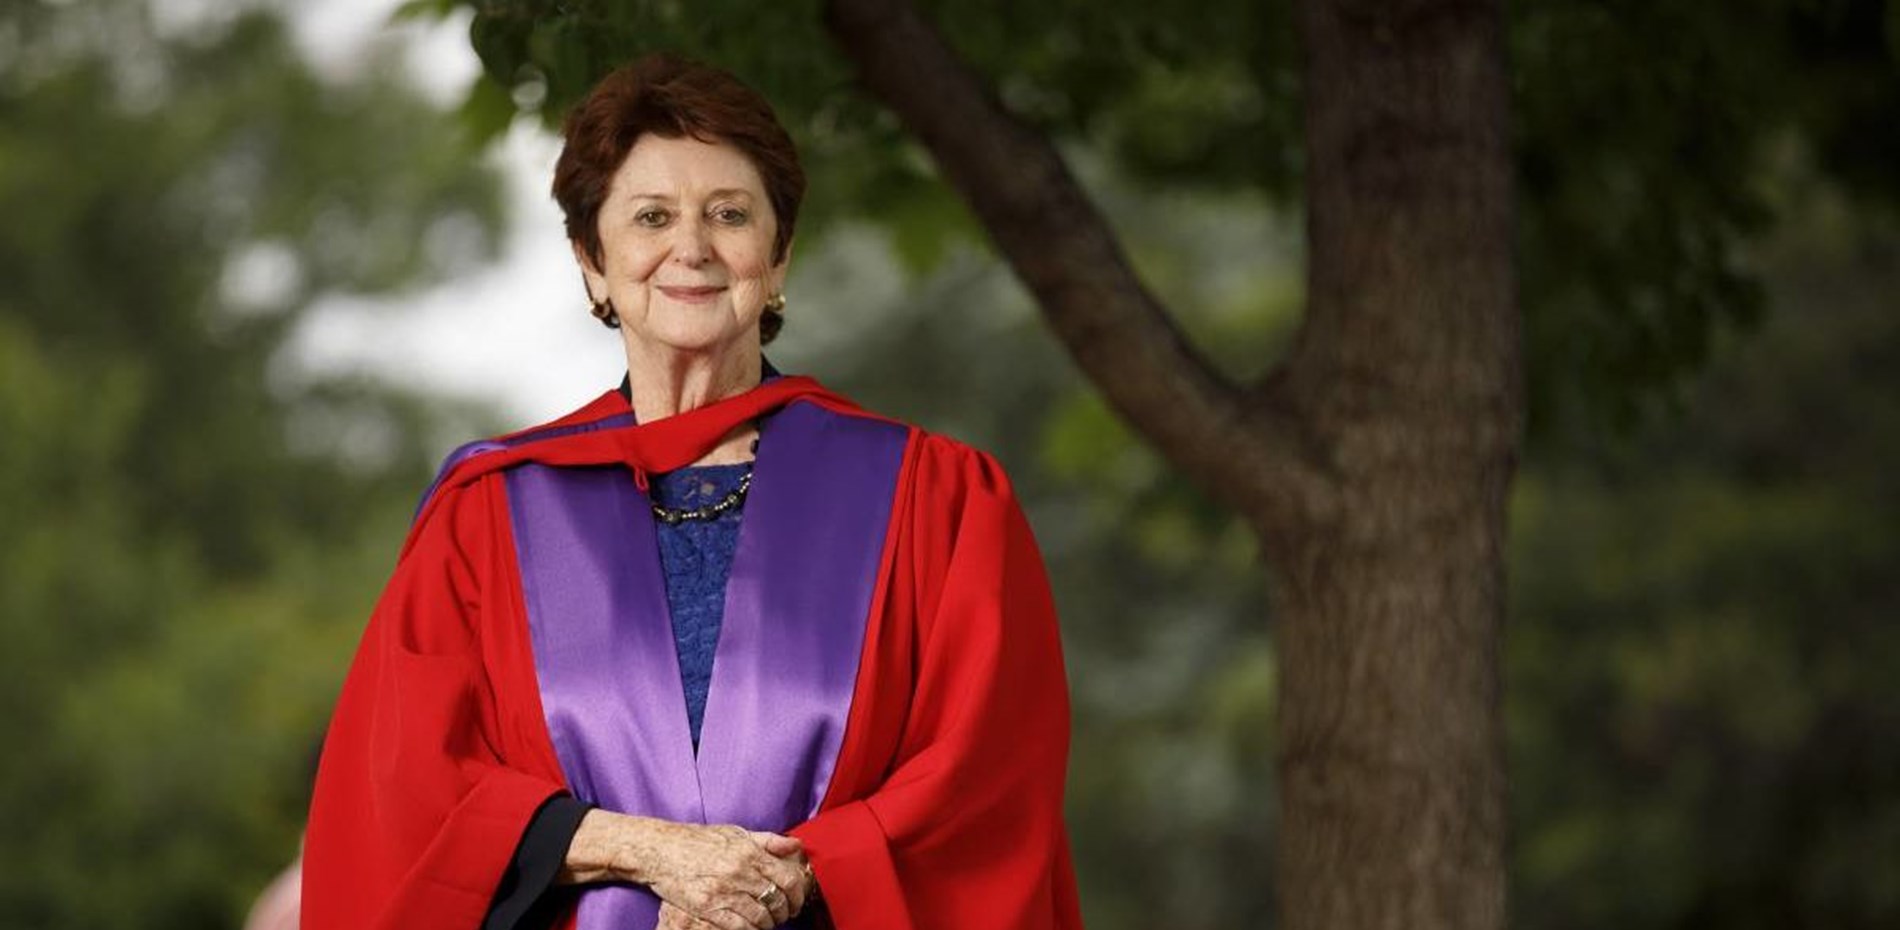 STATEMENT ON THE PASSING OF THE HON SUSAN RYAN AO Main Image